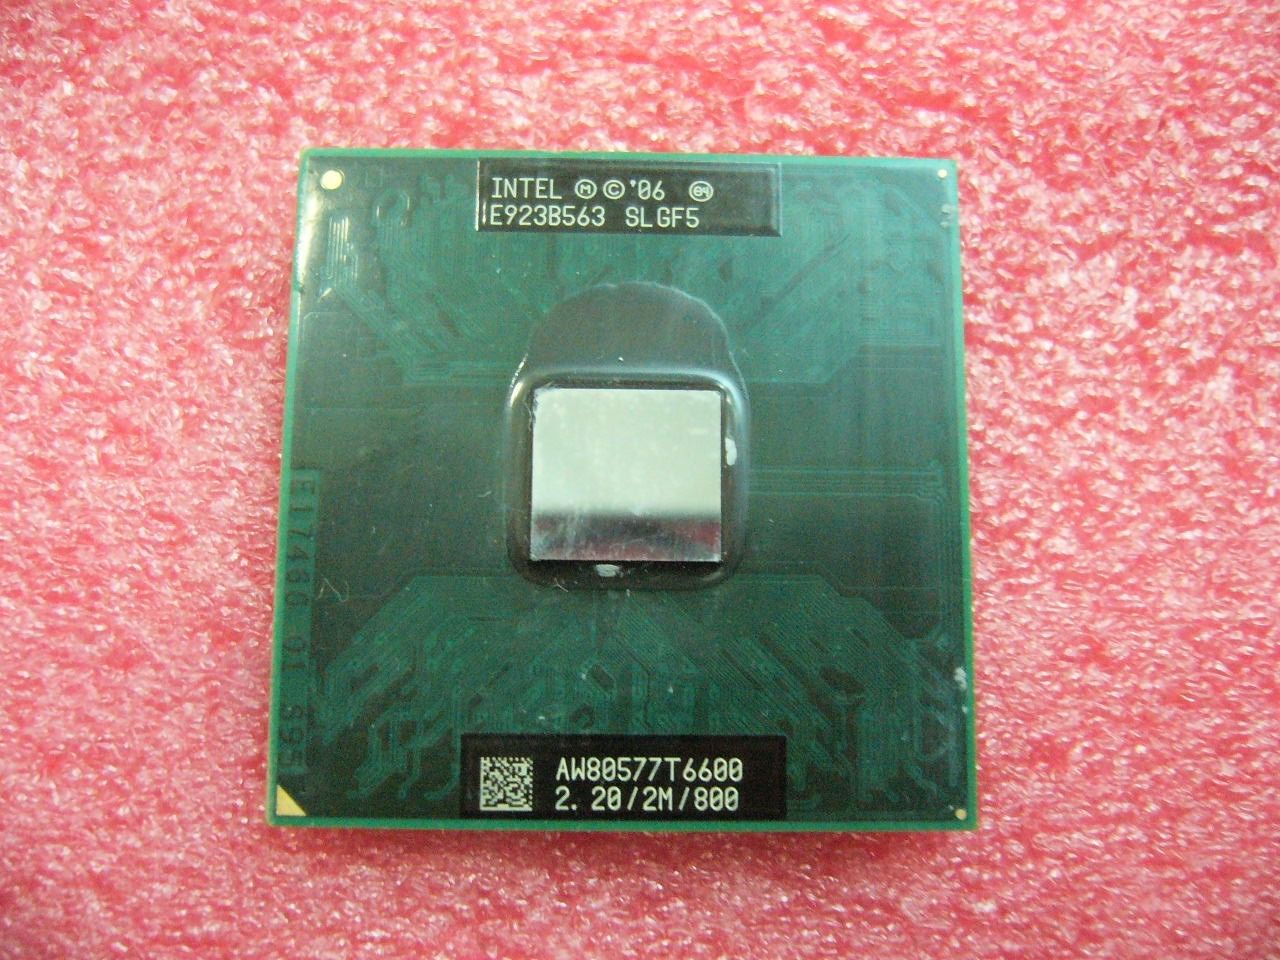 QTY 1x INTEL Core 2 Duo T6600 2.2 GHz/2M/800Mhz Processor for Laptop SLGF5 - Click Image to Close